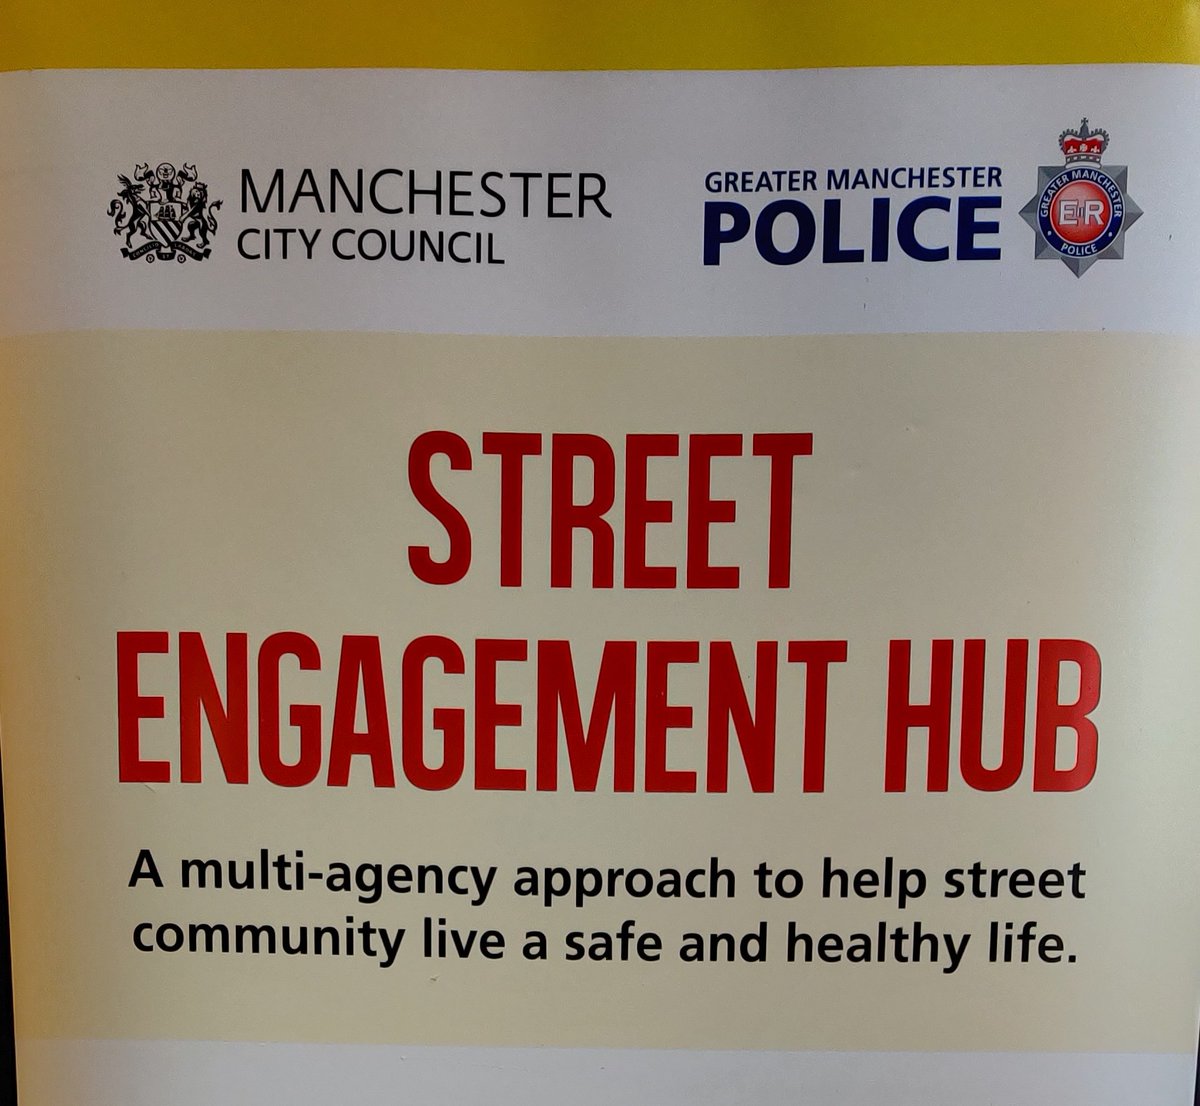 Street Engagement Hub Weekly figures  for March
#StreetEngagementHub
#EndHomelessnessMcr #StreetEngagementTeam 

#EndHomelessnessMcr #StreetEngagementTeam 
facebook.com/groups/3387875…